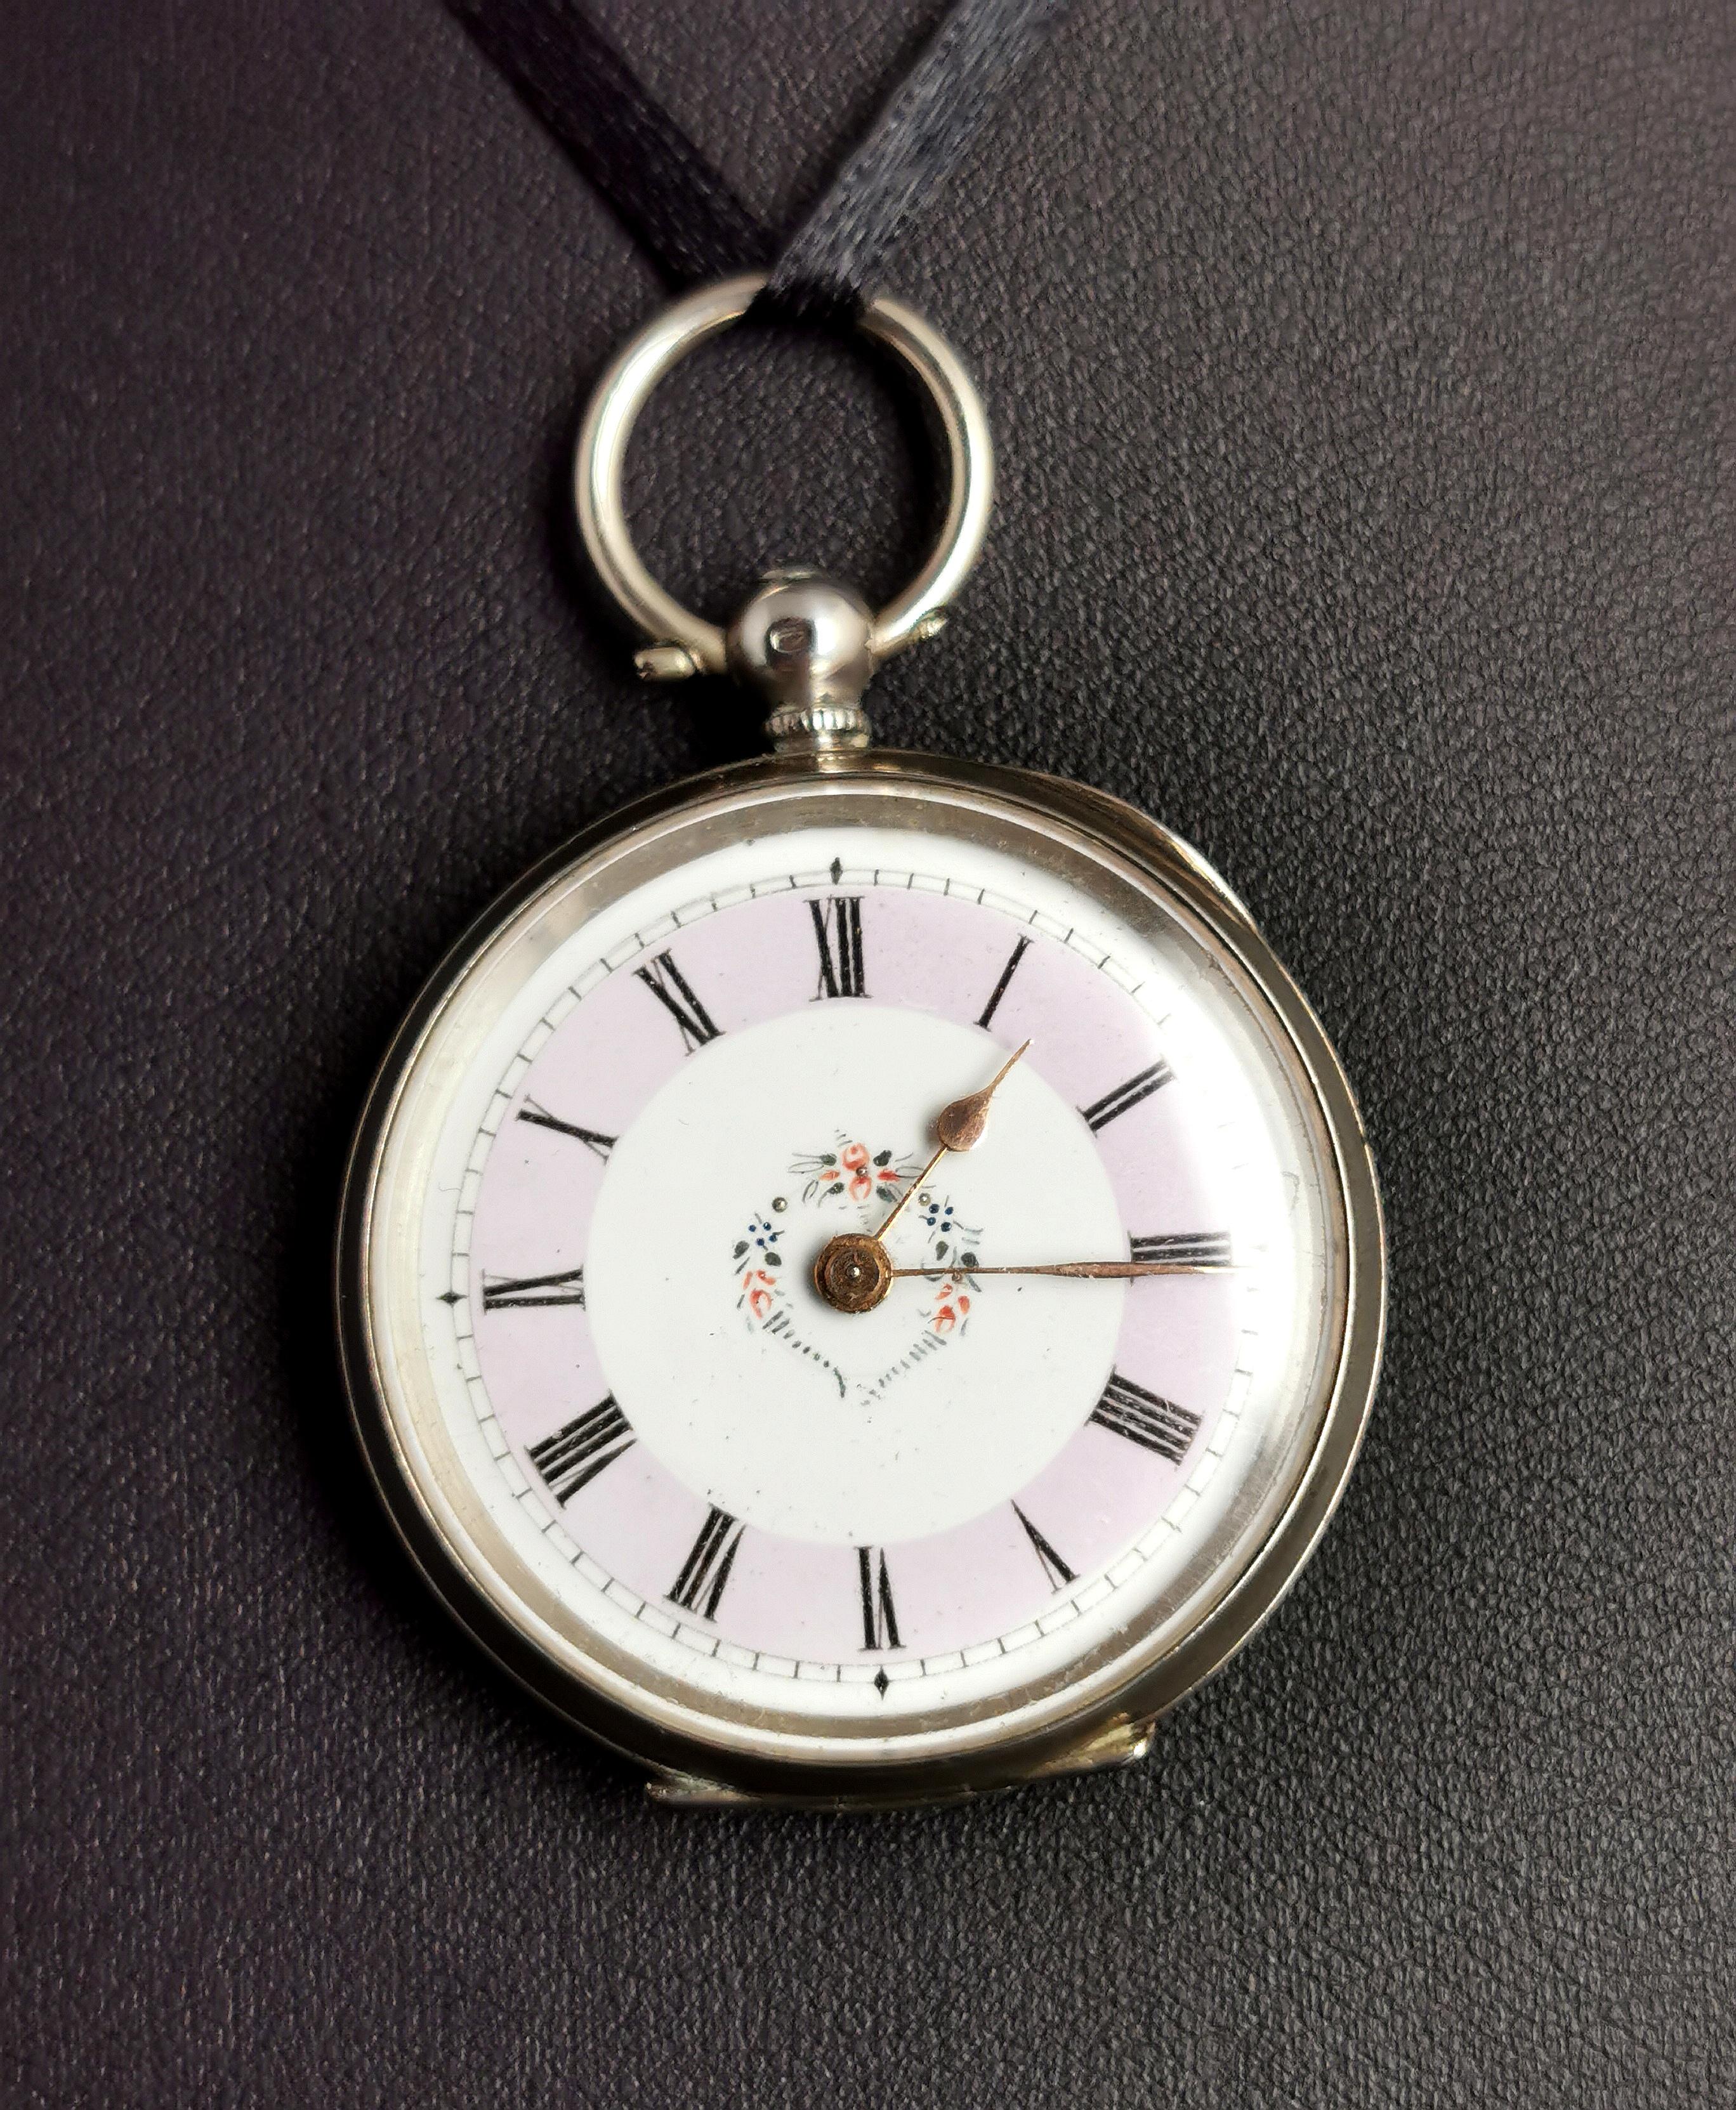 A beautiful antique, early Edwardian era silver, ladies fob watch or pocket watch.

It has a pretty silver case with an engraved floral design to the verso featuring a small blank cartouche which could be engraved if desired.

It has a white enamel